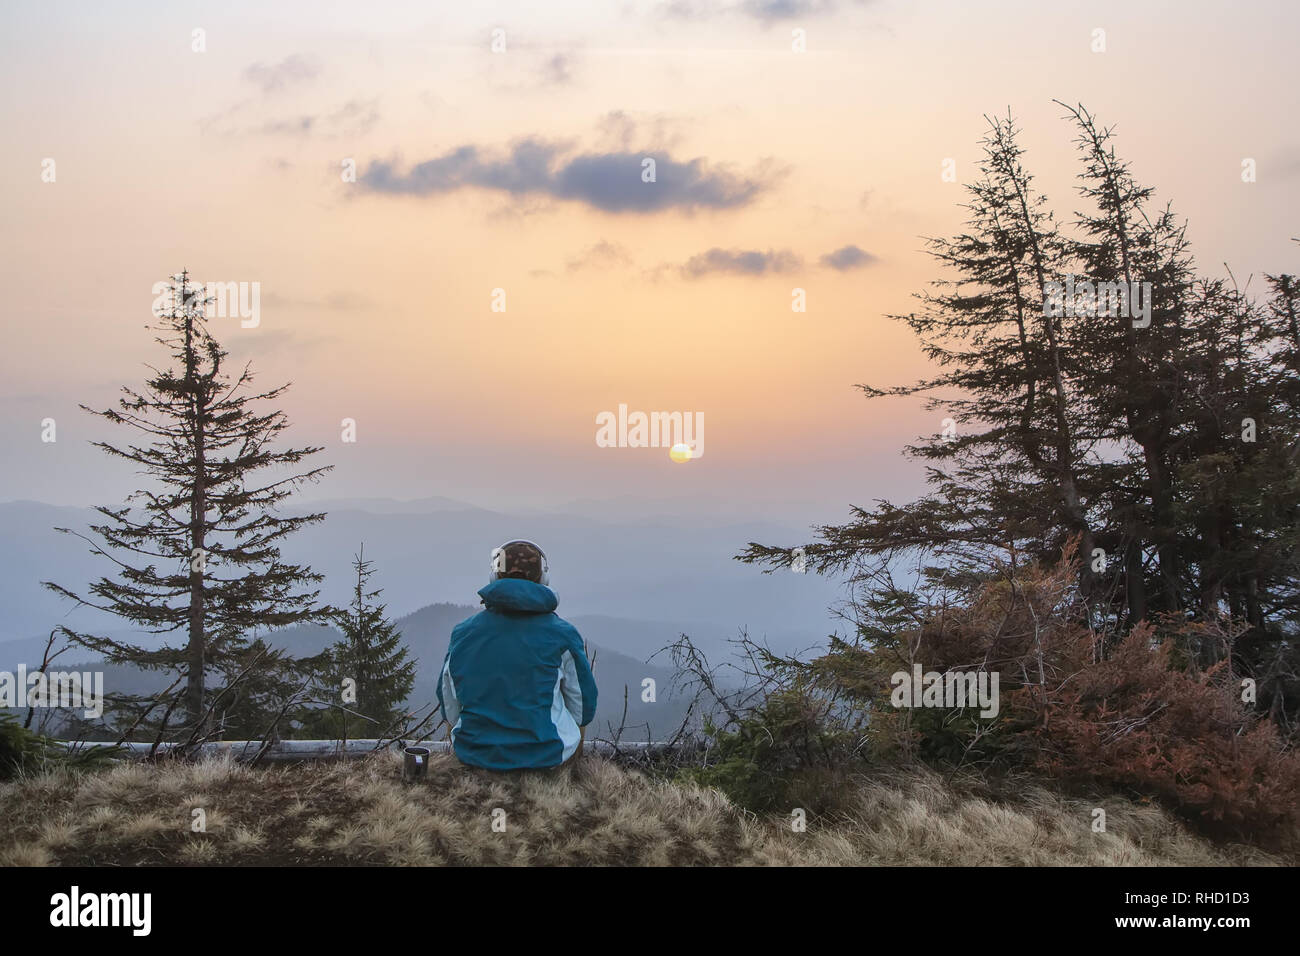 A young youth in headphones watches the sunrise in the mountains with a cup of tea, a sonception, a trip, a hike, a rest, solitude Stock Photo